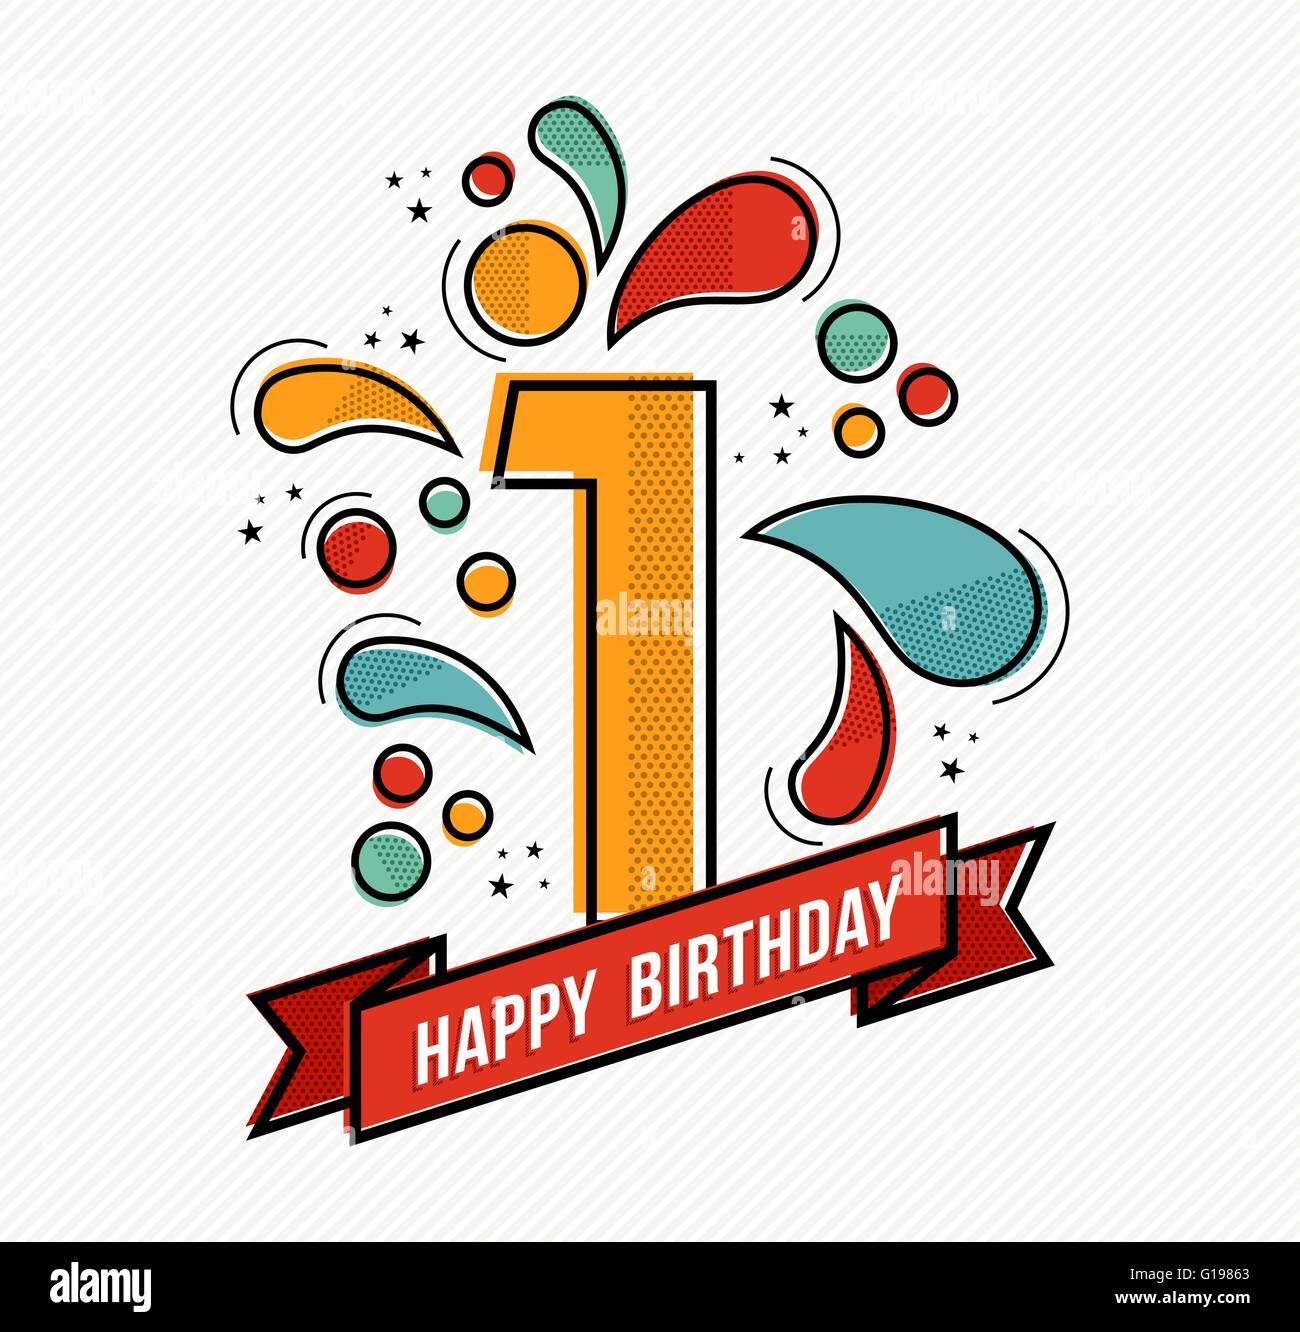 Happy birthday number 1, greeting card for one year in modern flat line art with colorful geometric shapes. Stock Vector